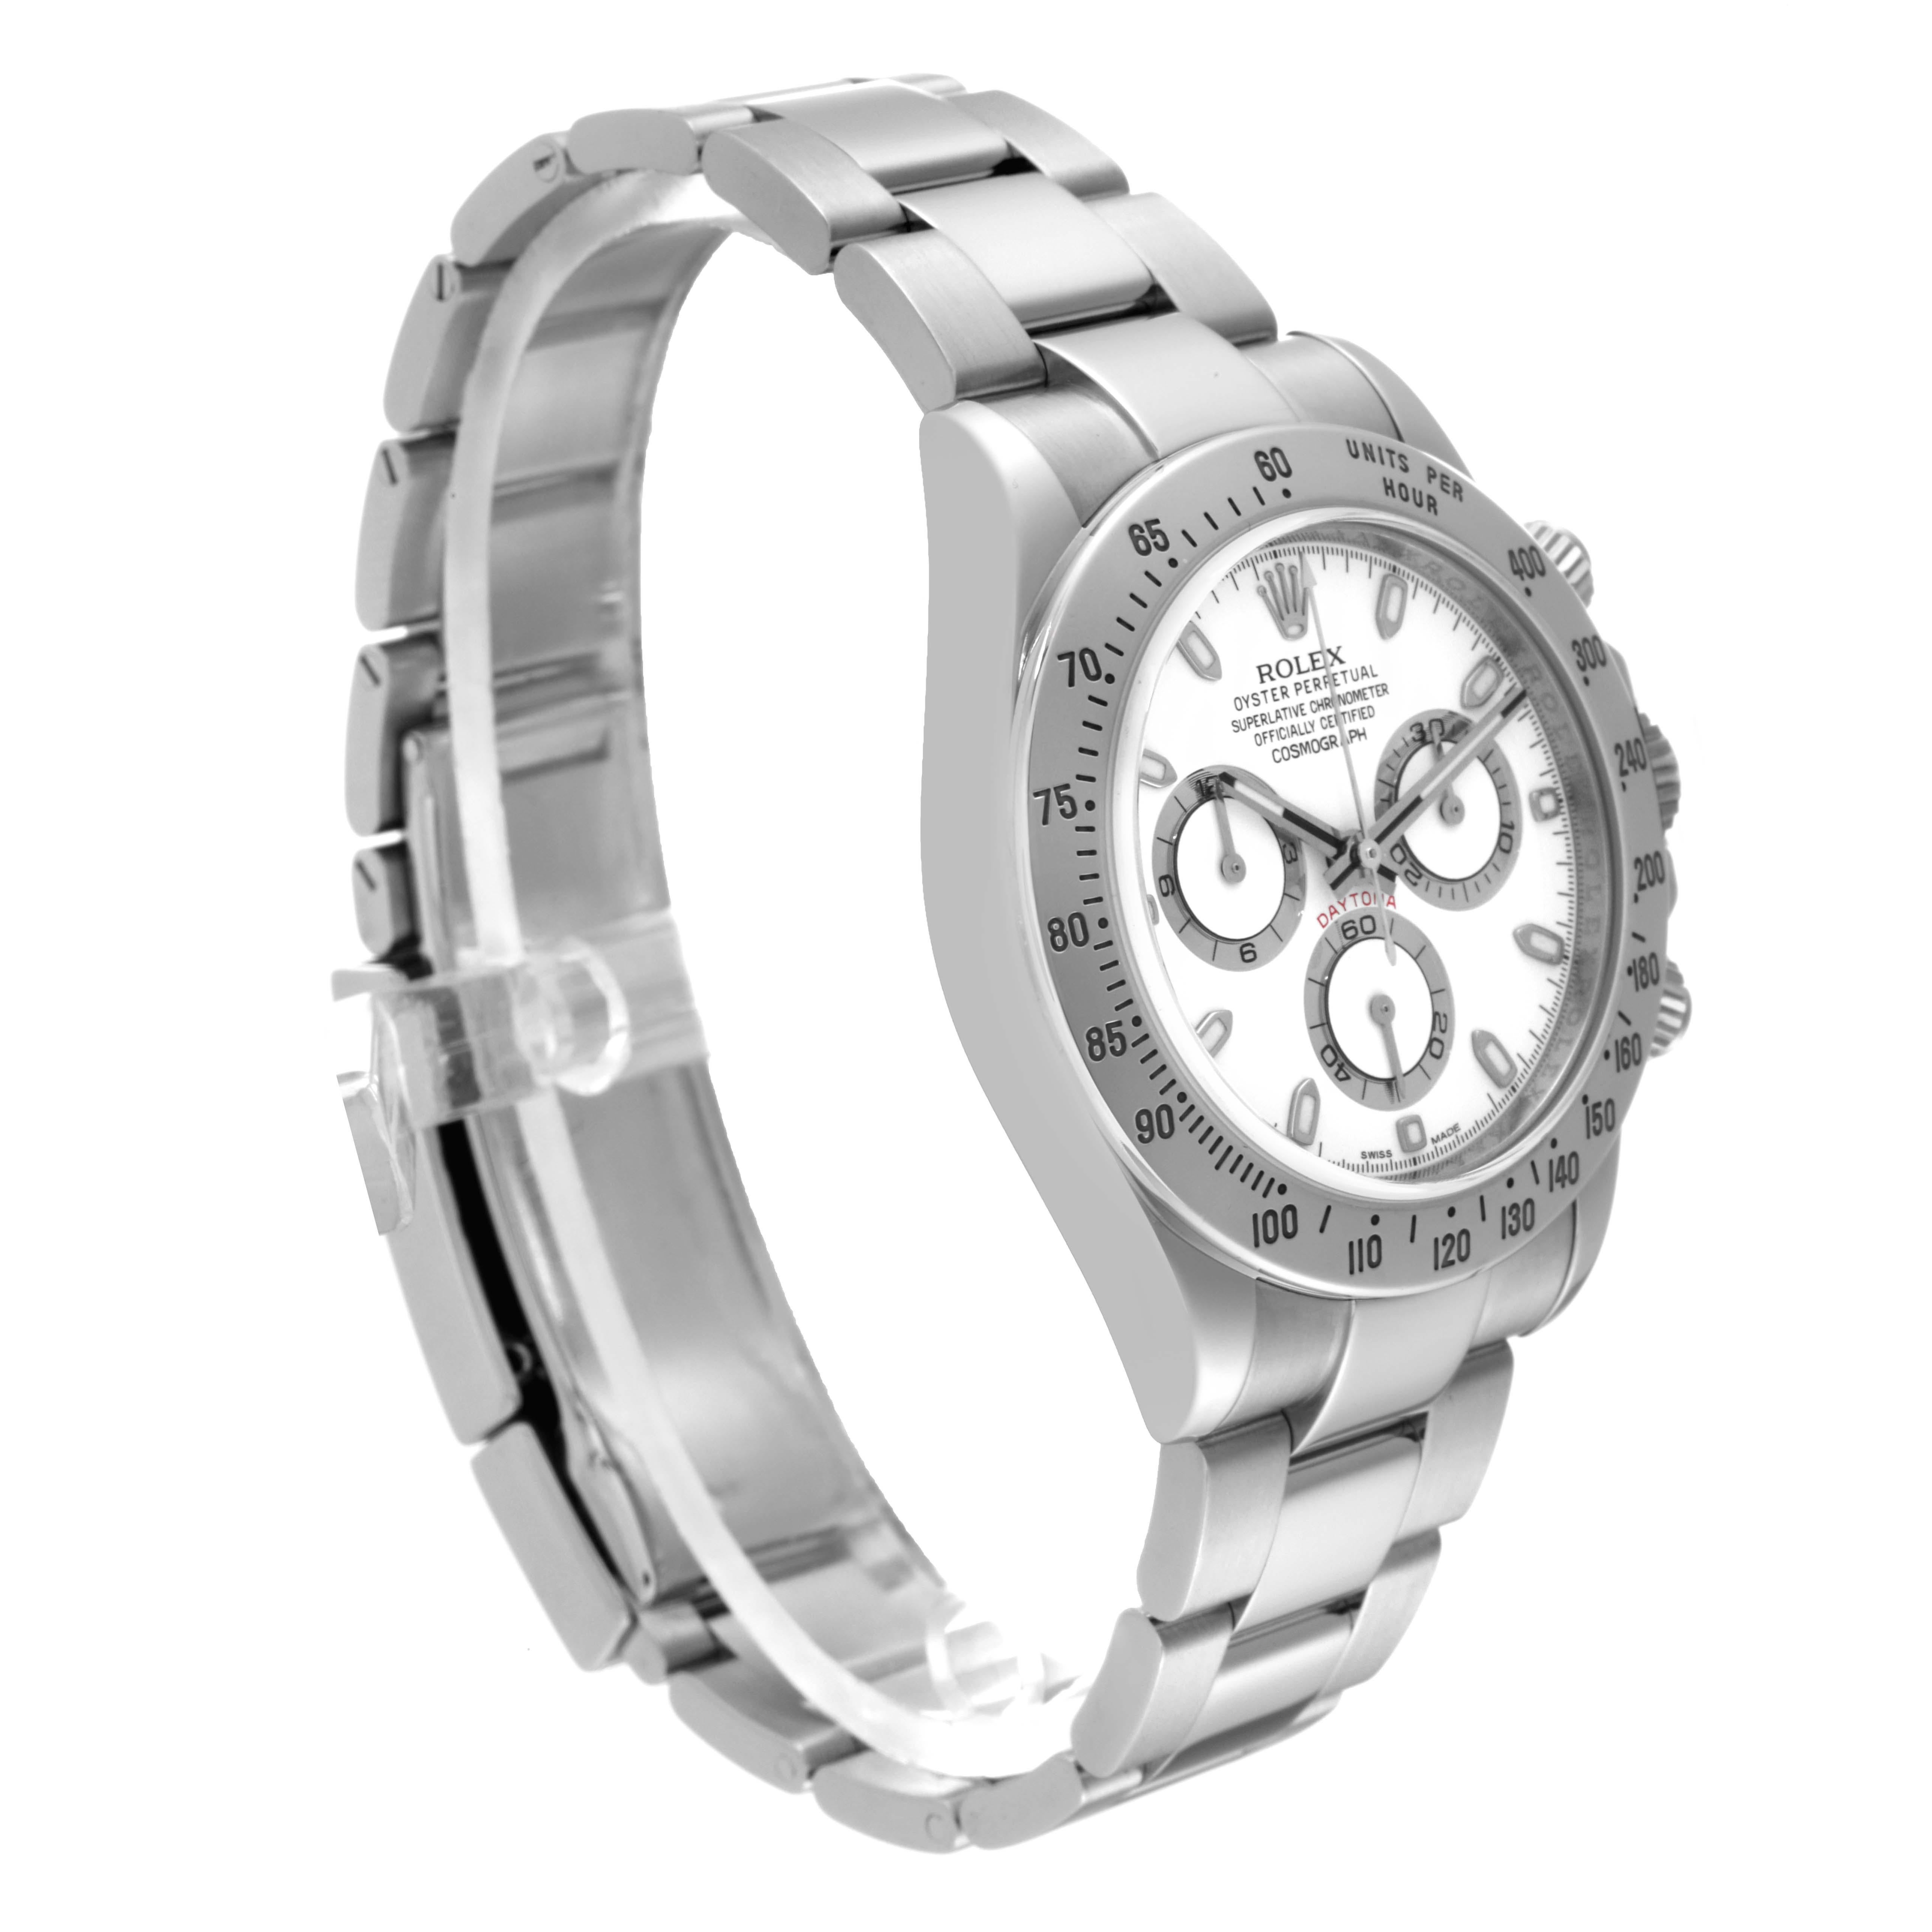 Rolex Daytona White Dial Chronograph Steel Mens Watch 116520 Box Card For Sale 5